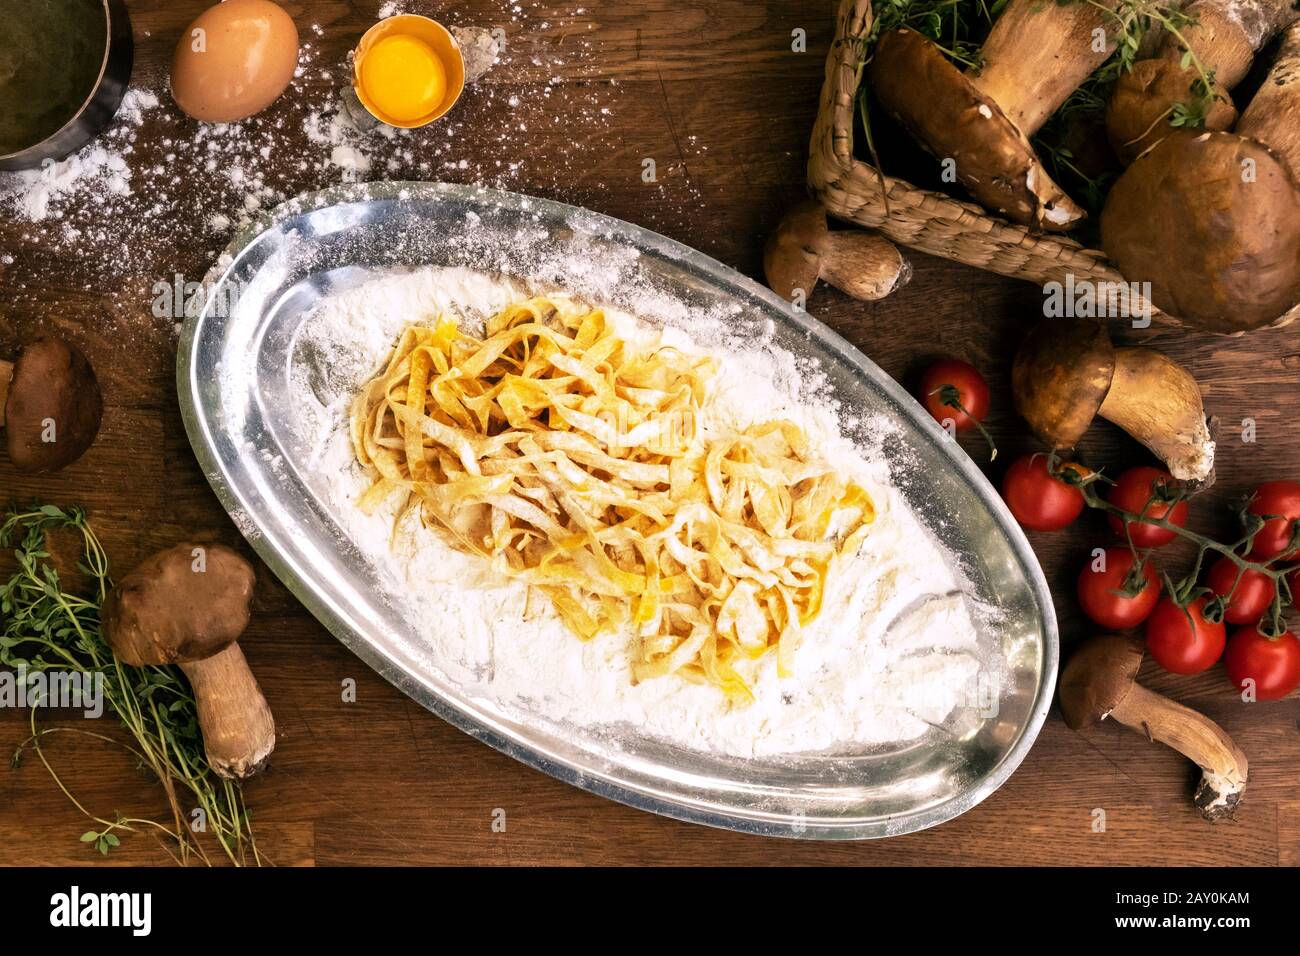 Freshly made tagliatelle pasta with mushroom, tomato and thyme Stock Photo